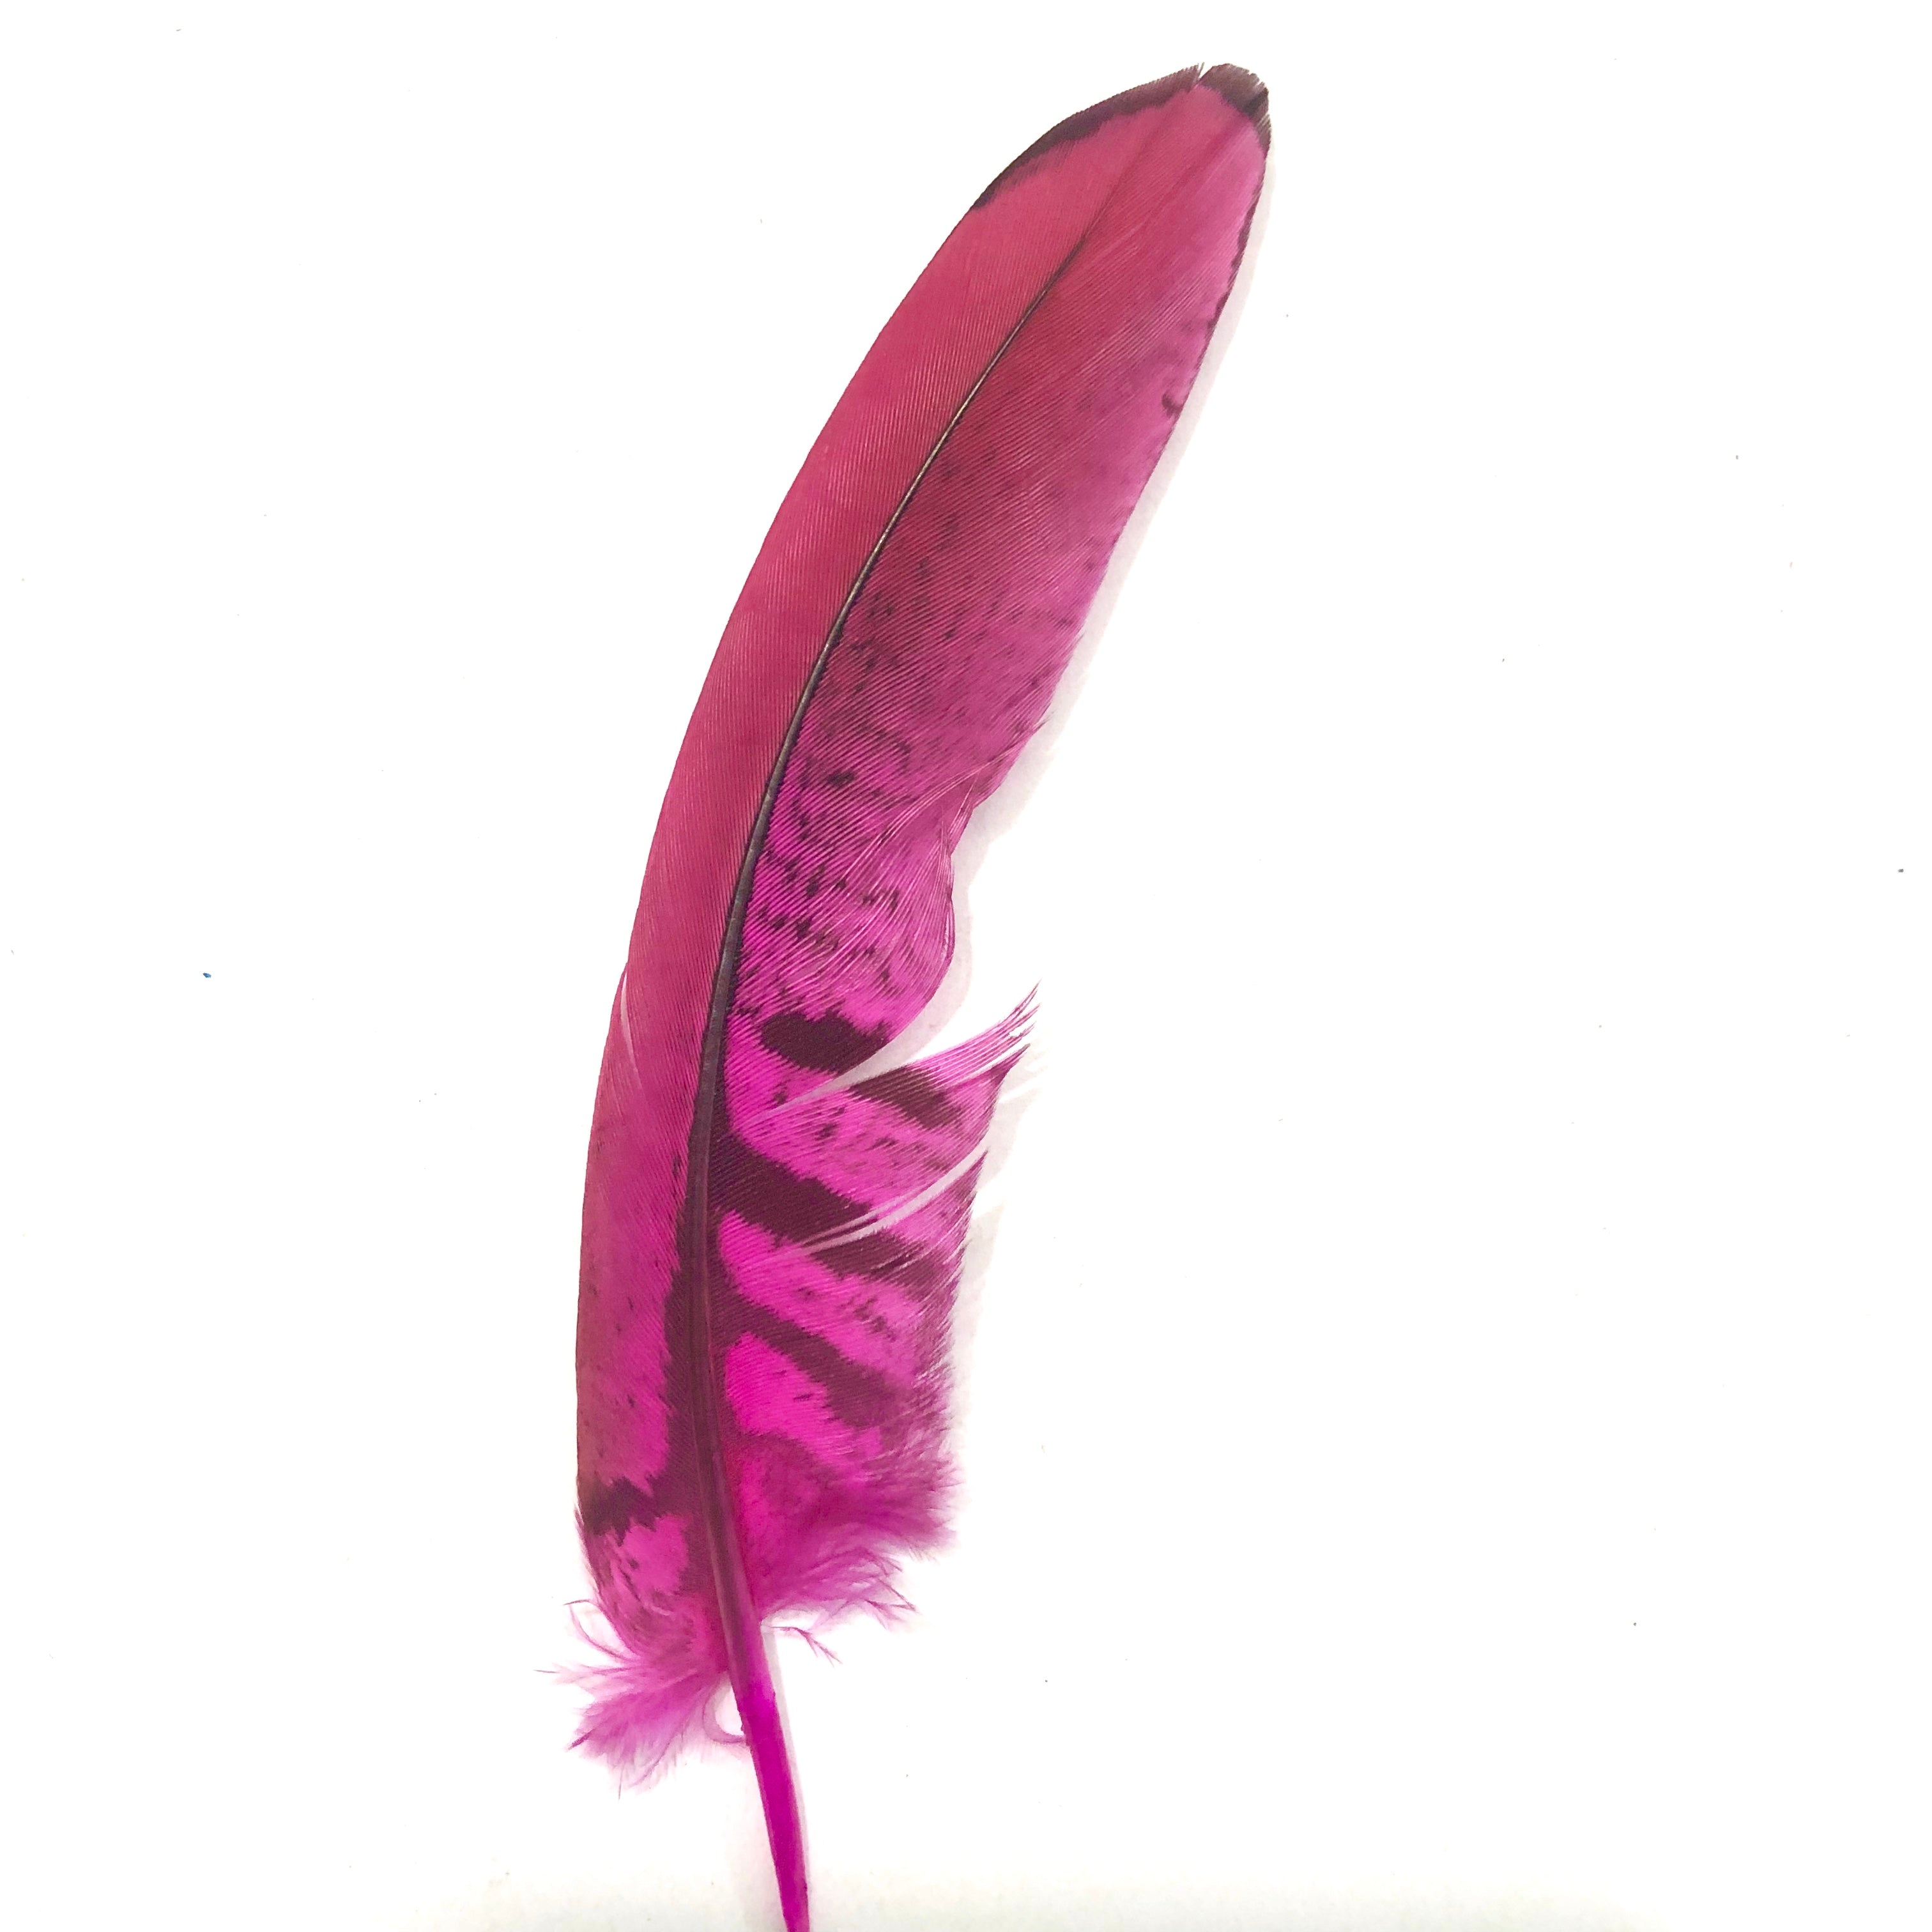 Under 6" Reeves Pheasant Tail Feather x 10 pcs - Hot Pink